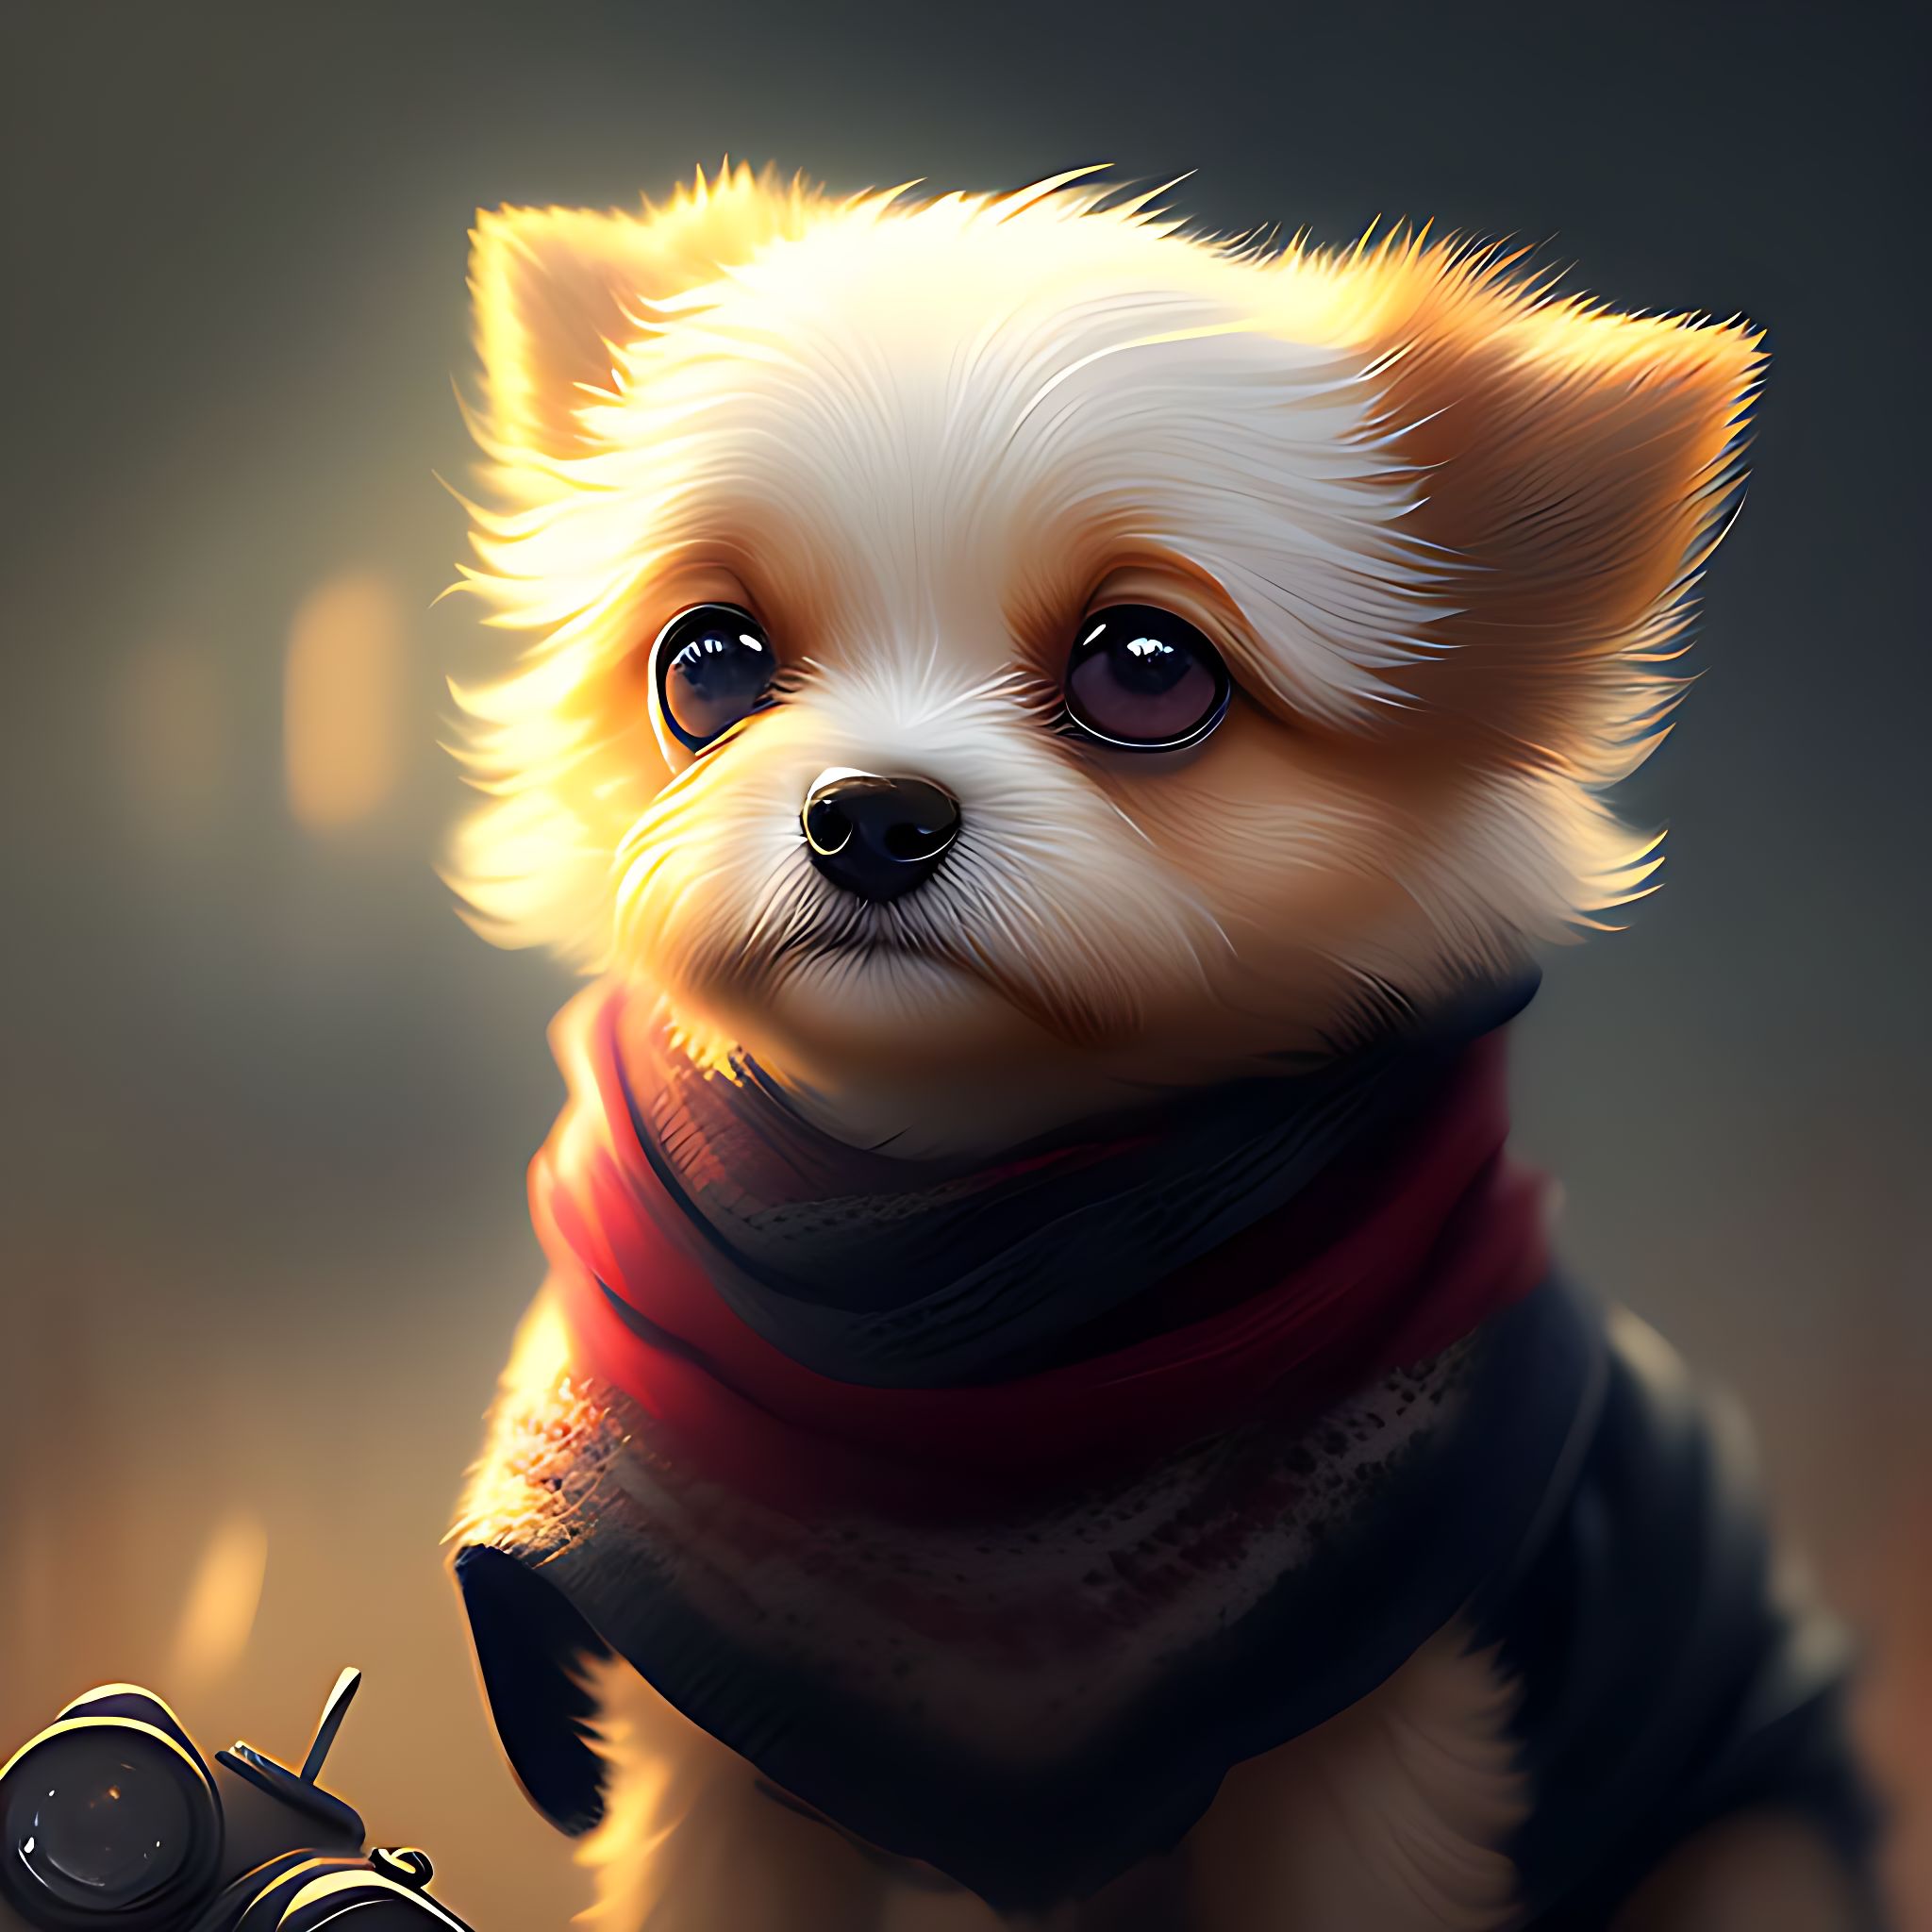 paltry-fly575: a very cute dog with a scarf with a plain background